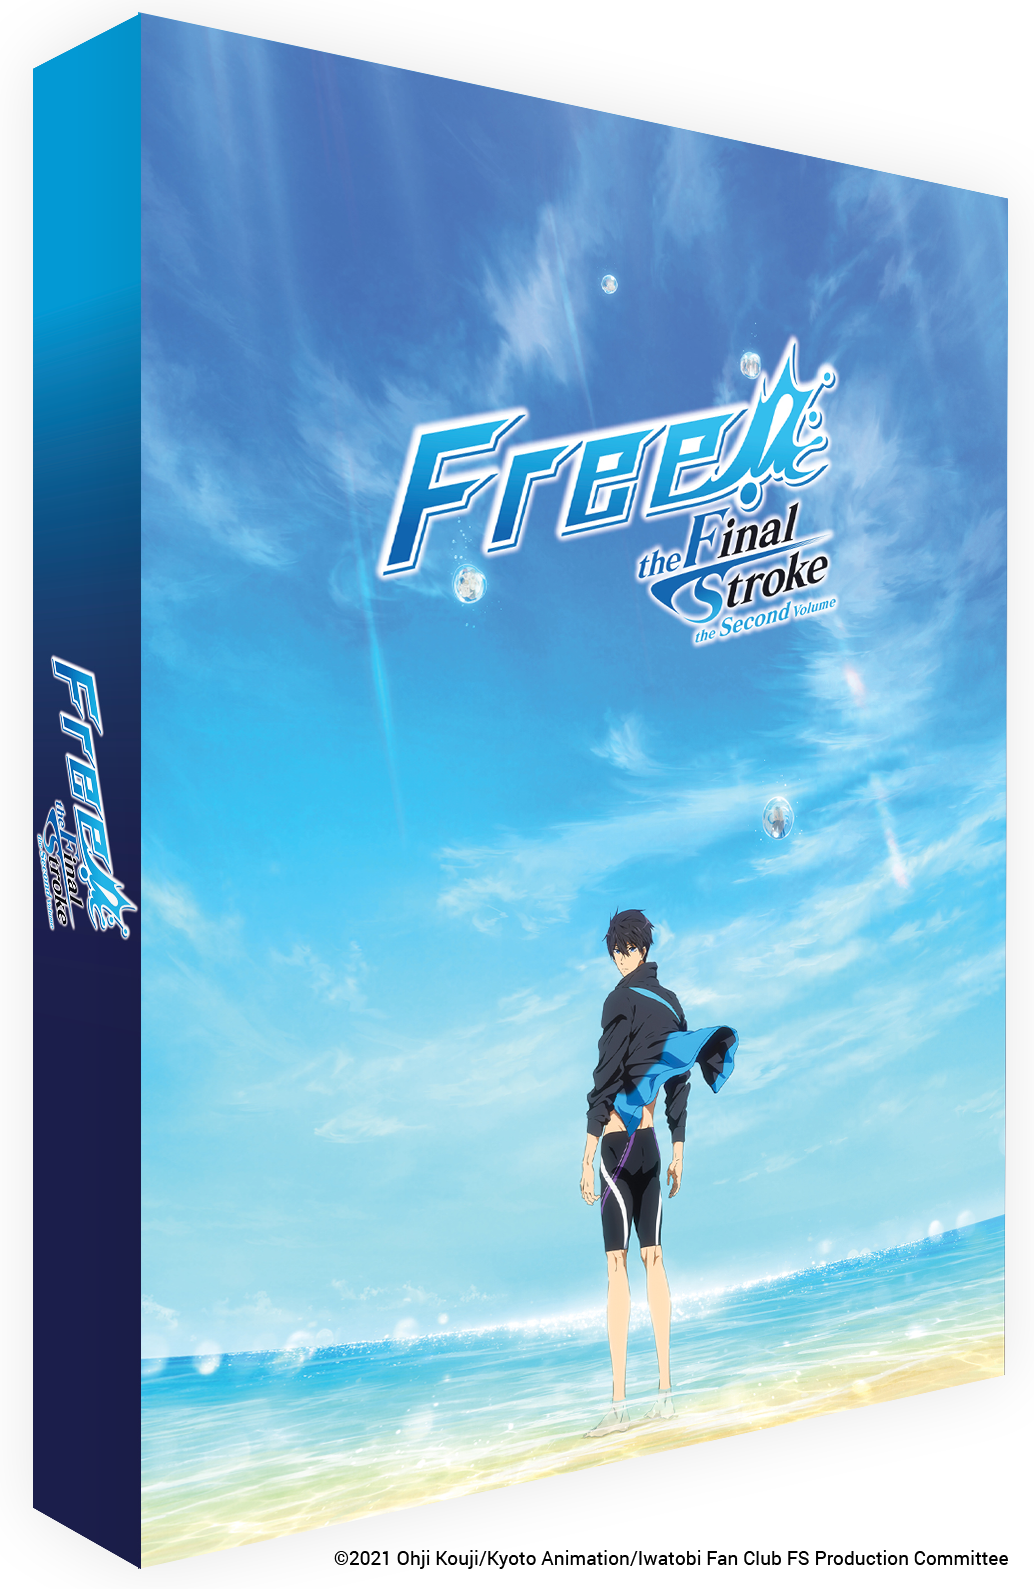 Free! The Final Stroke Part 2 - Blu-ray + DVD Collector's Edition